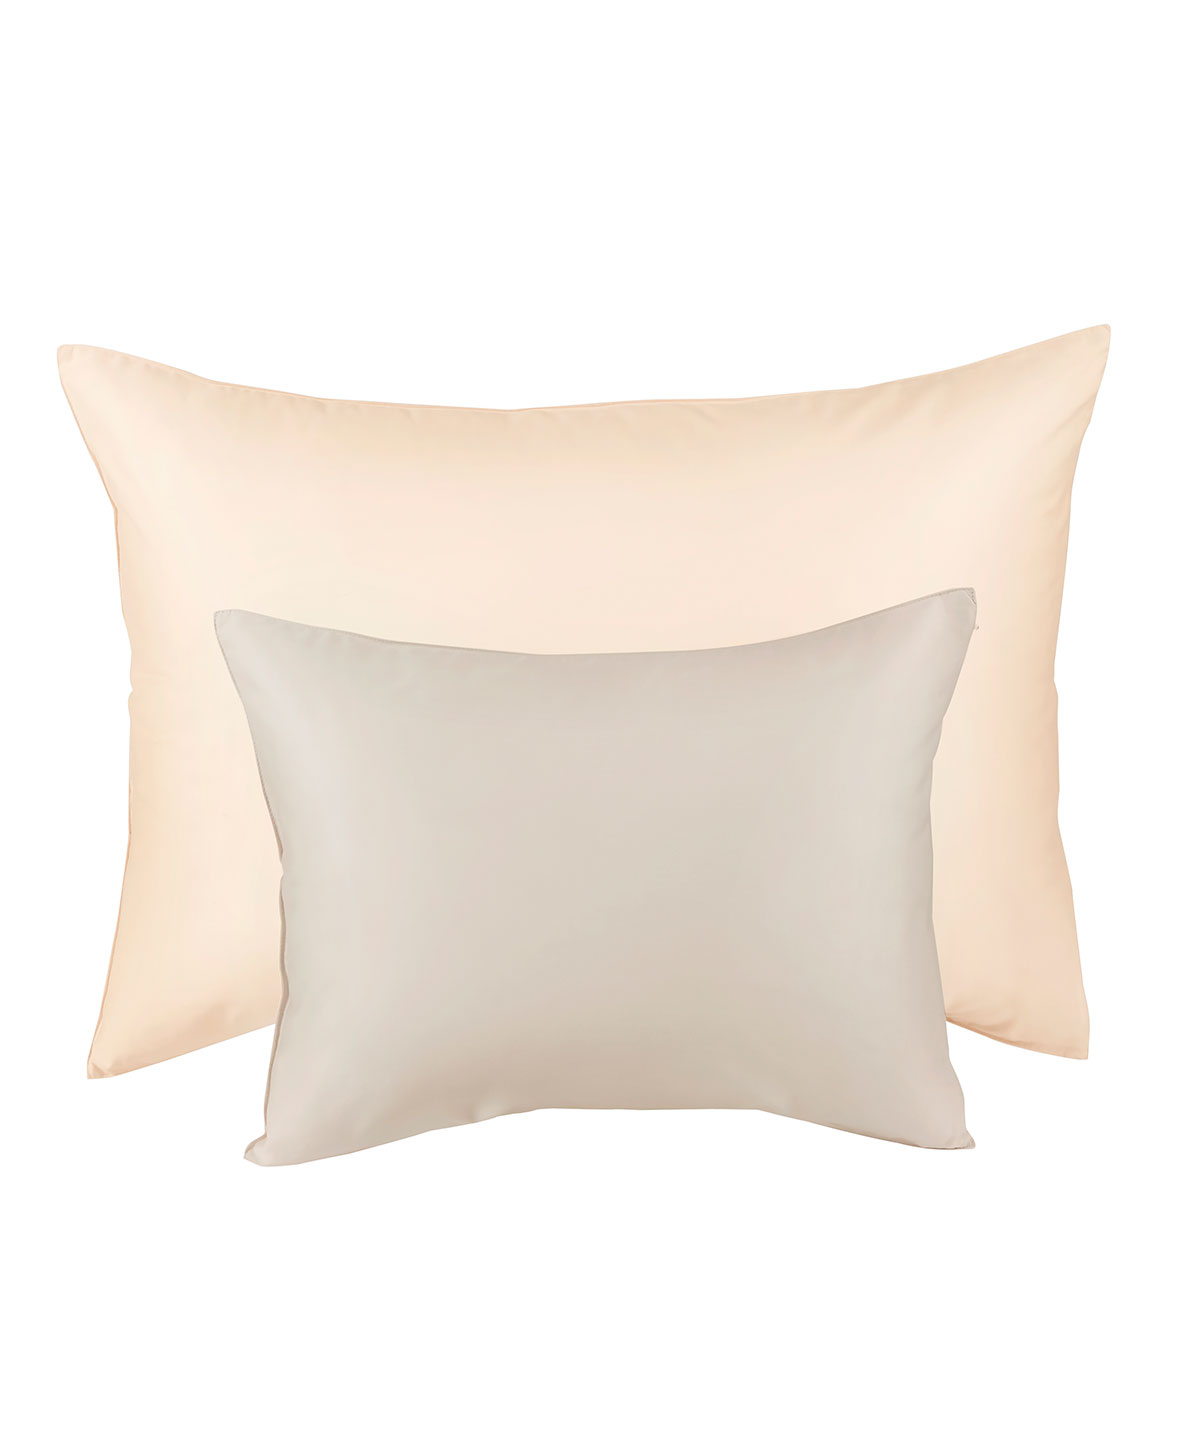 Sorrento Pair of Pillow Cases